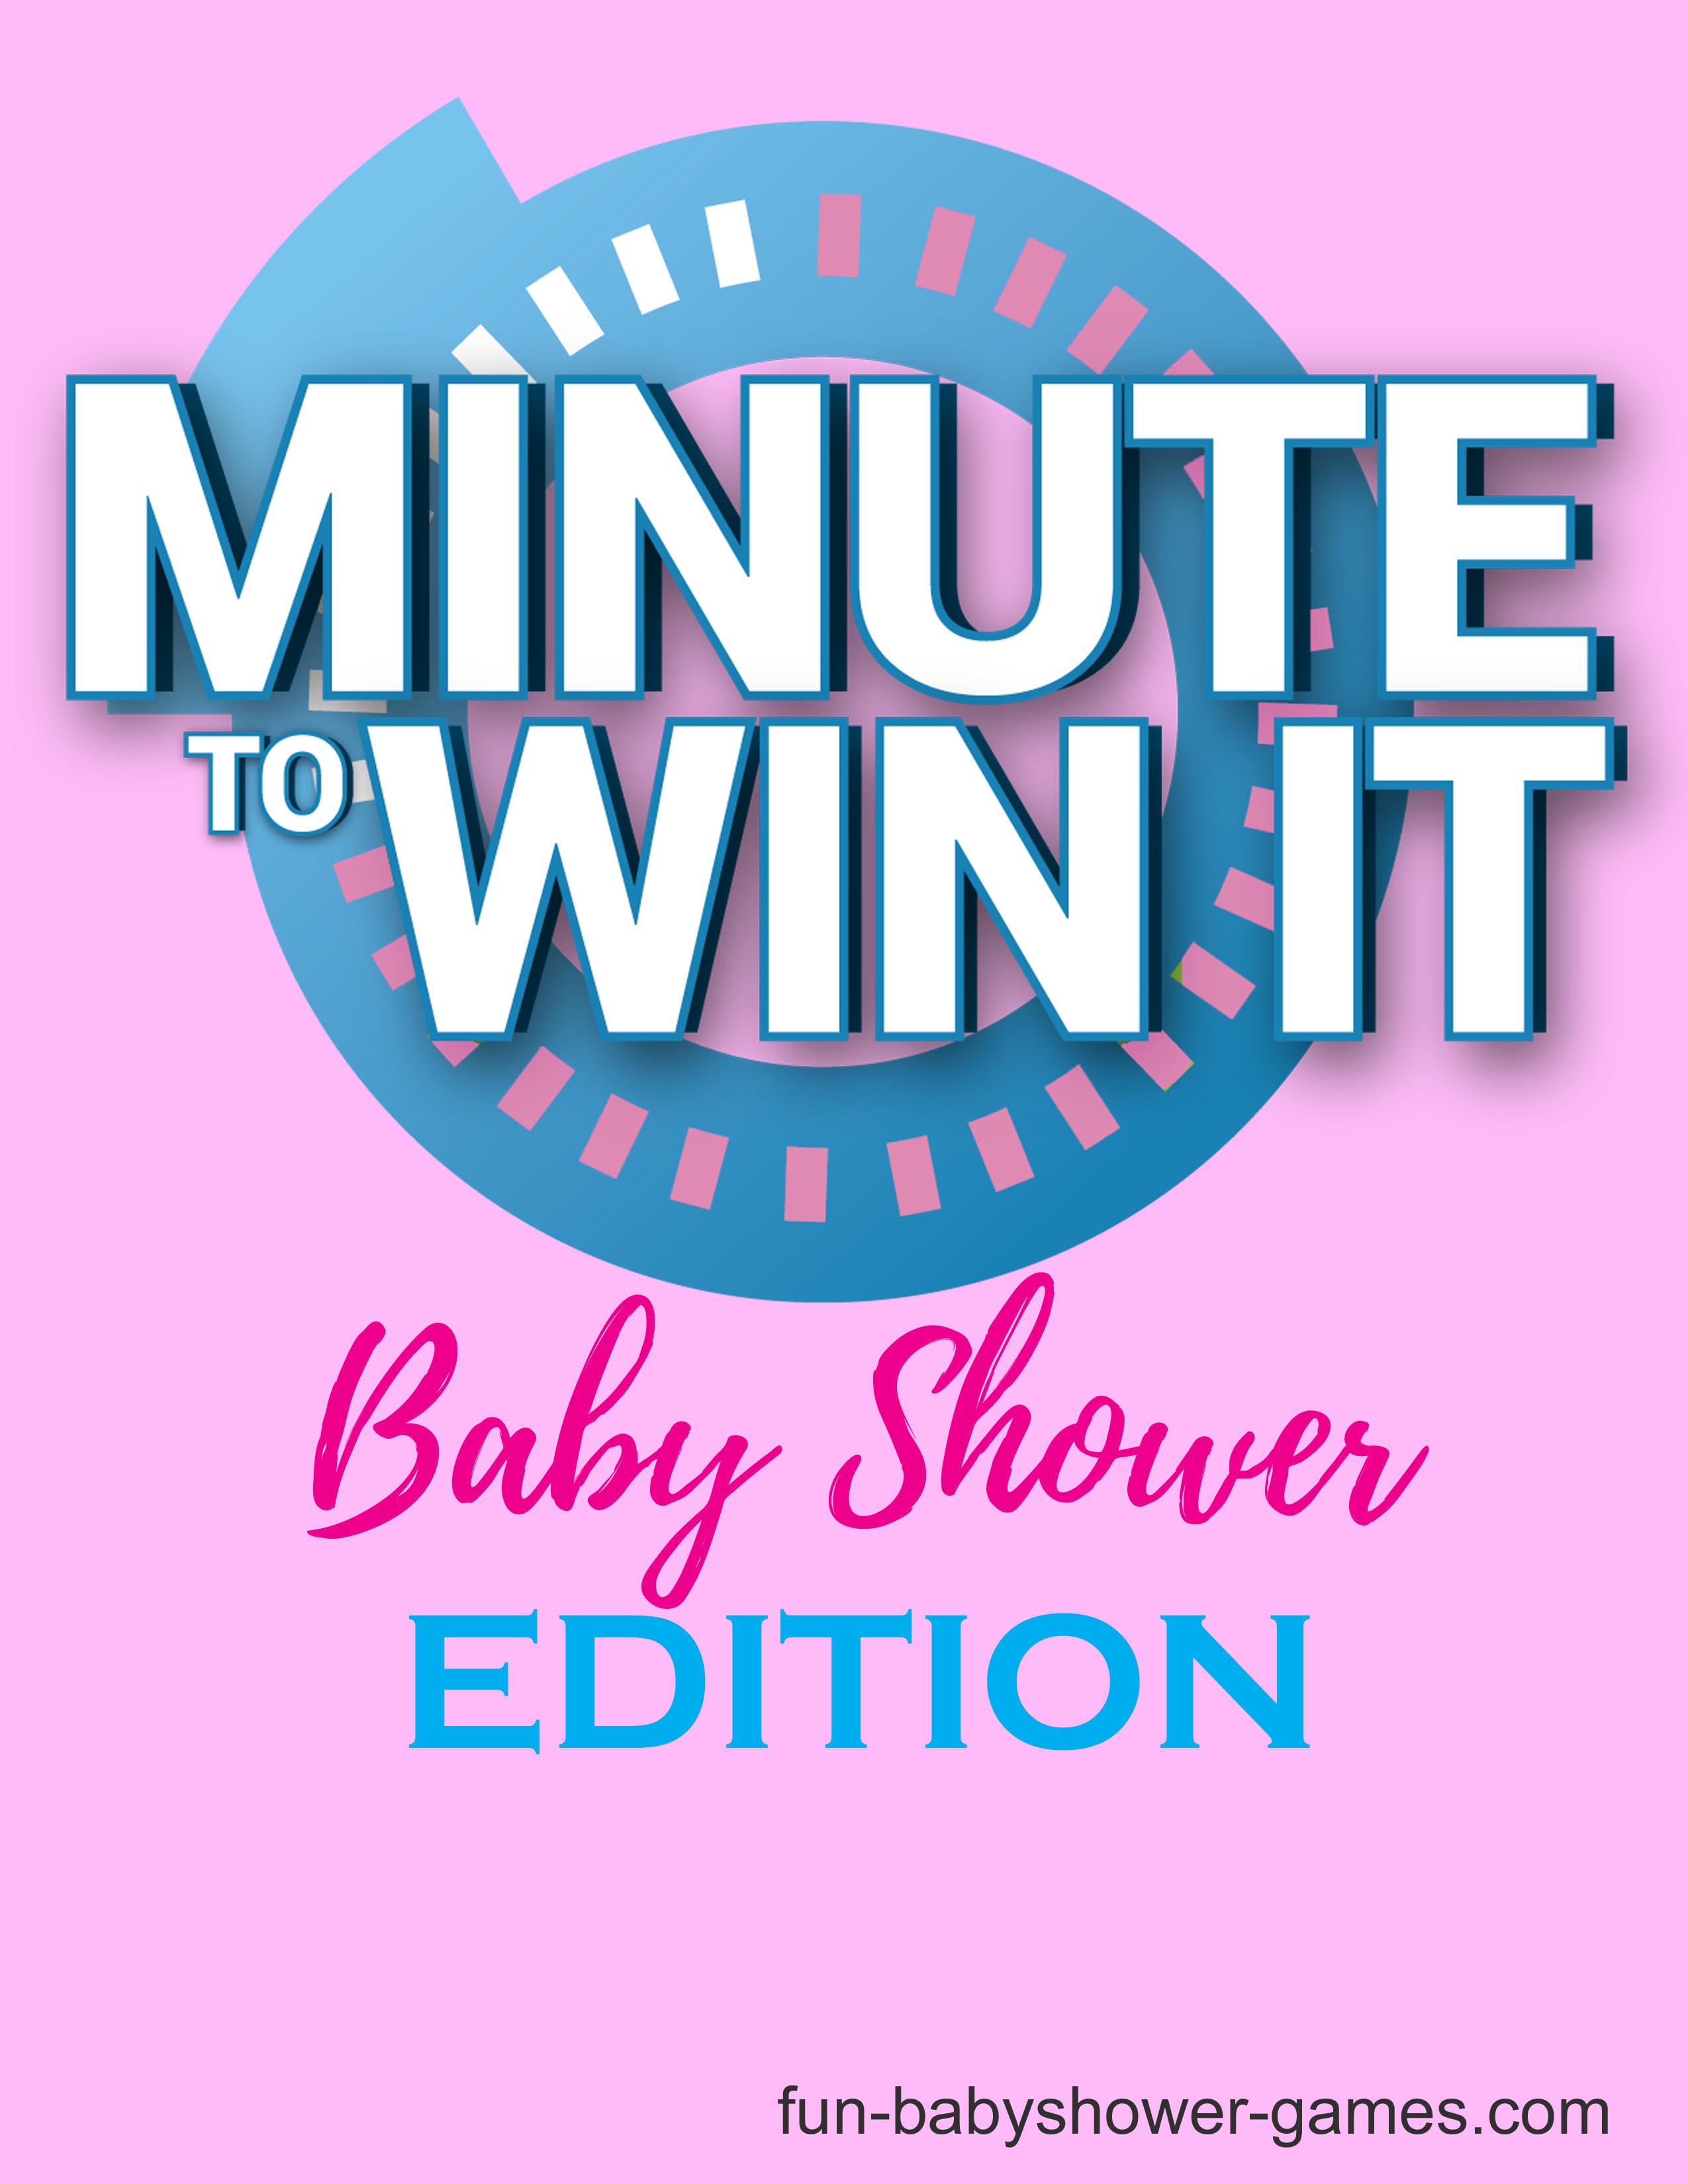 Minute to win it baby shower games are fun and easy to plan and play. Perfect for coed showers